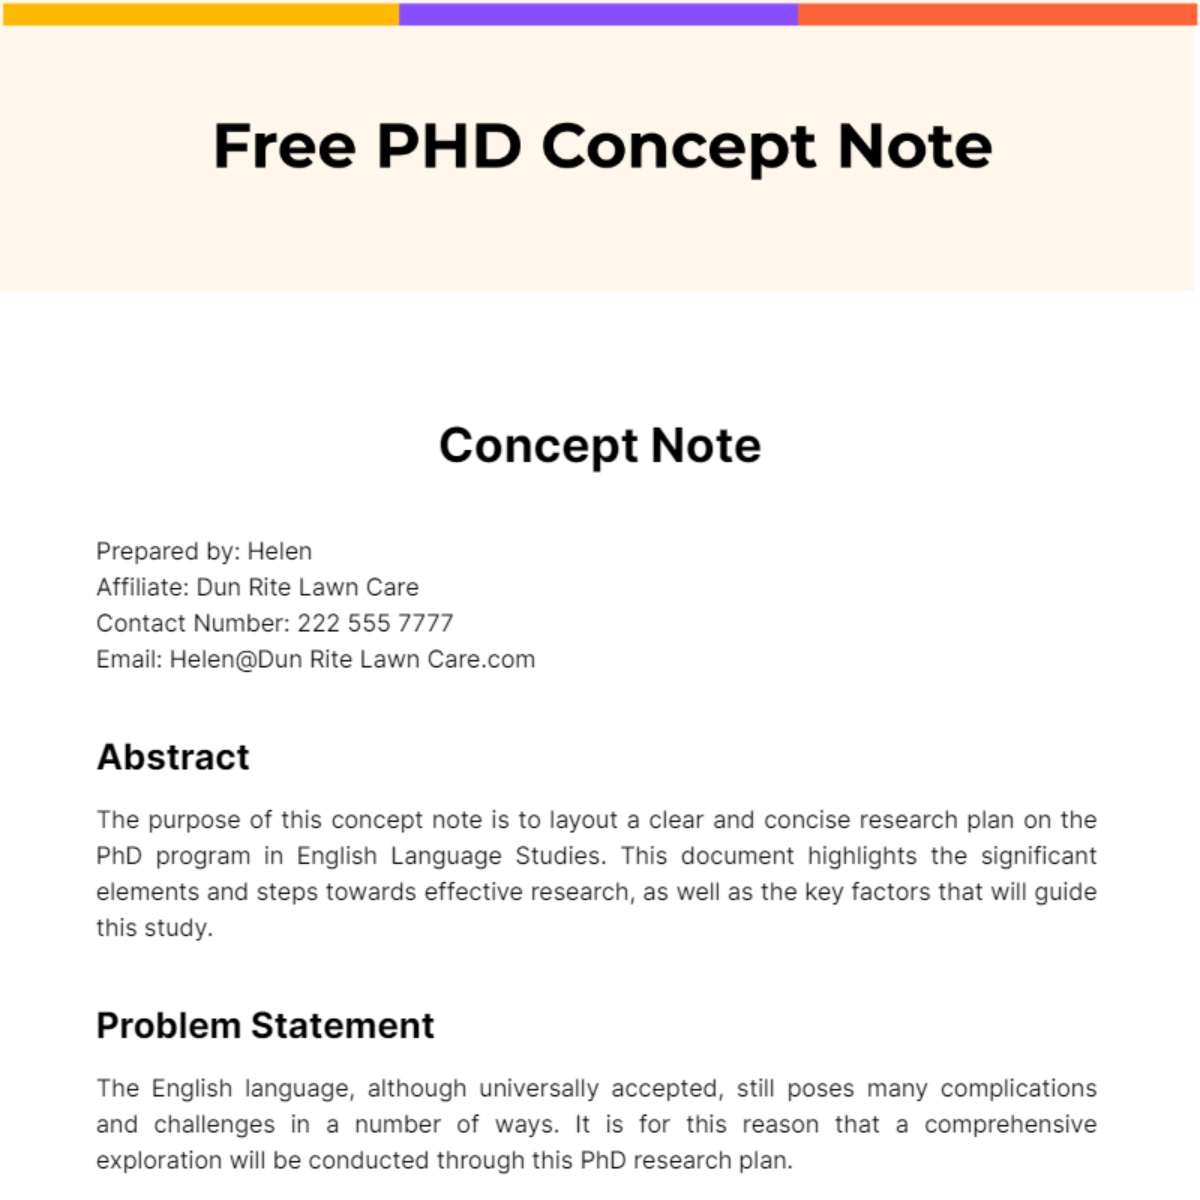 Free PHD Concept Note Template